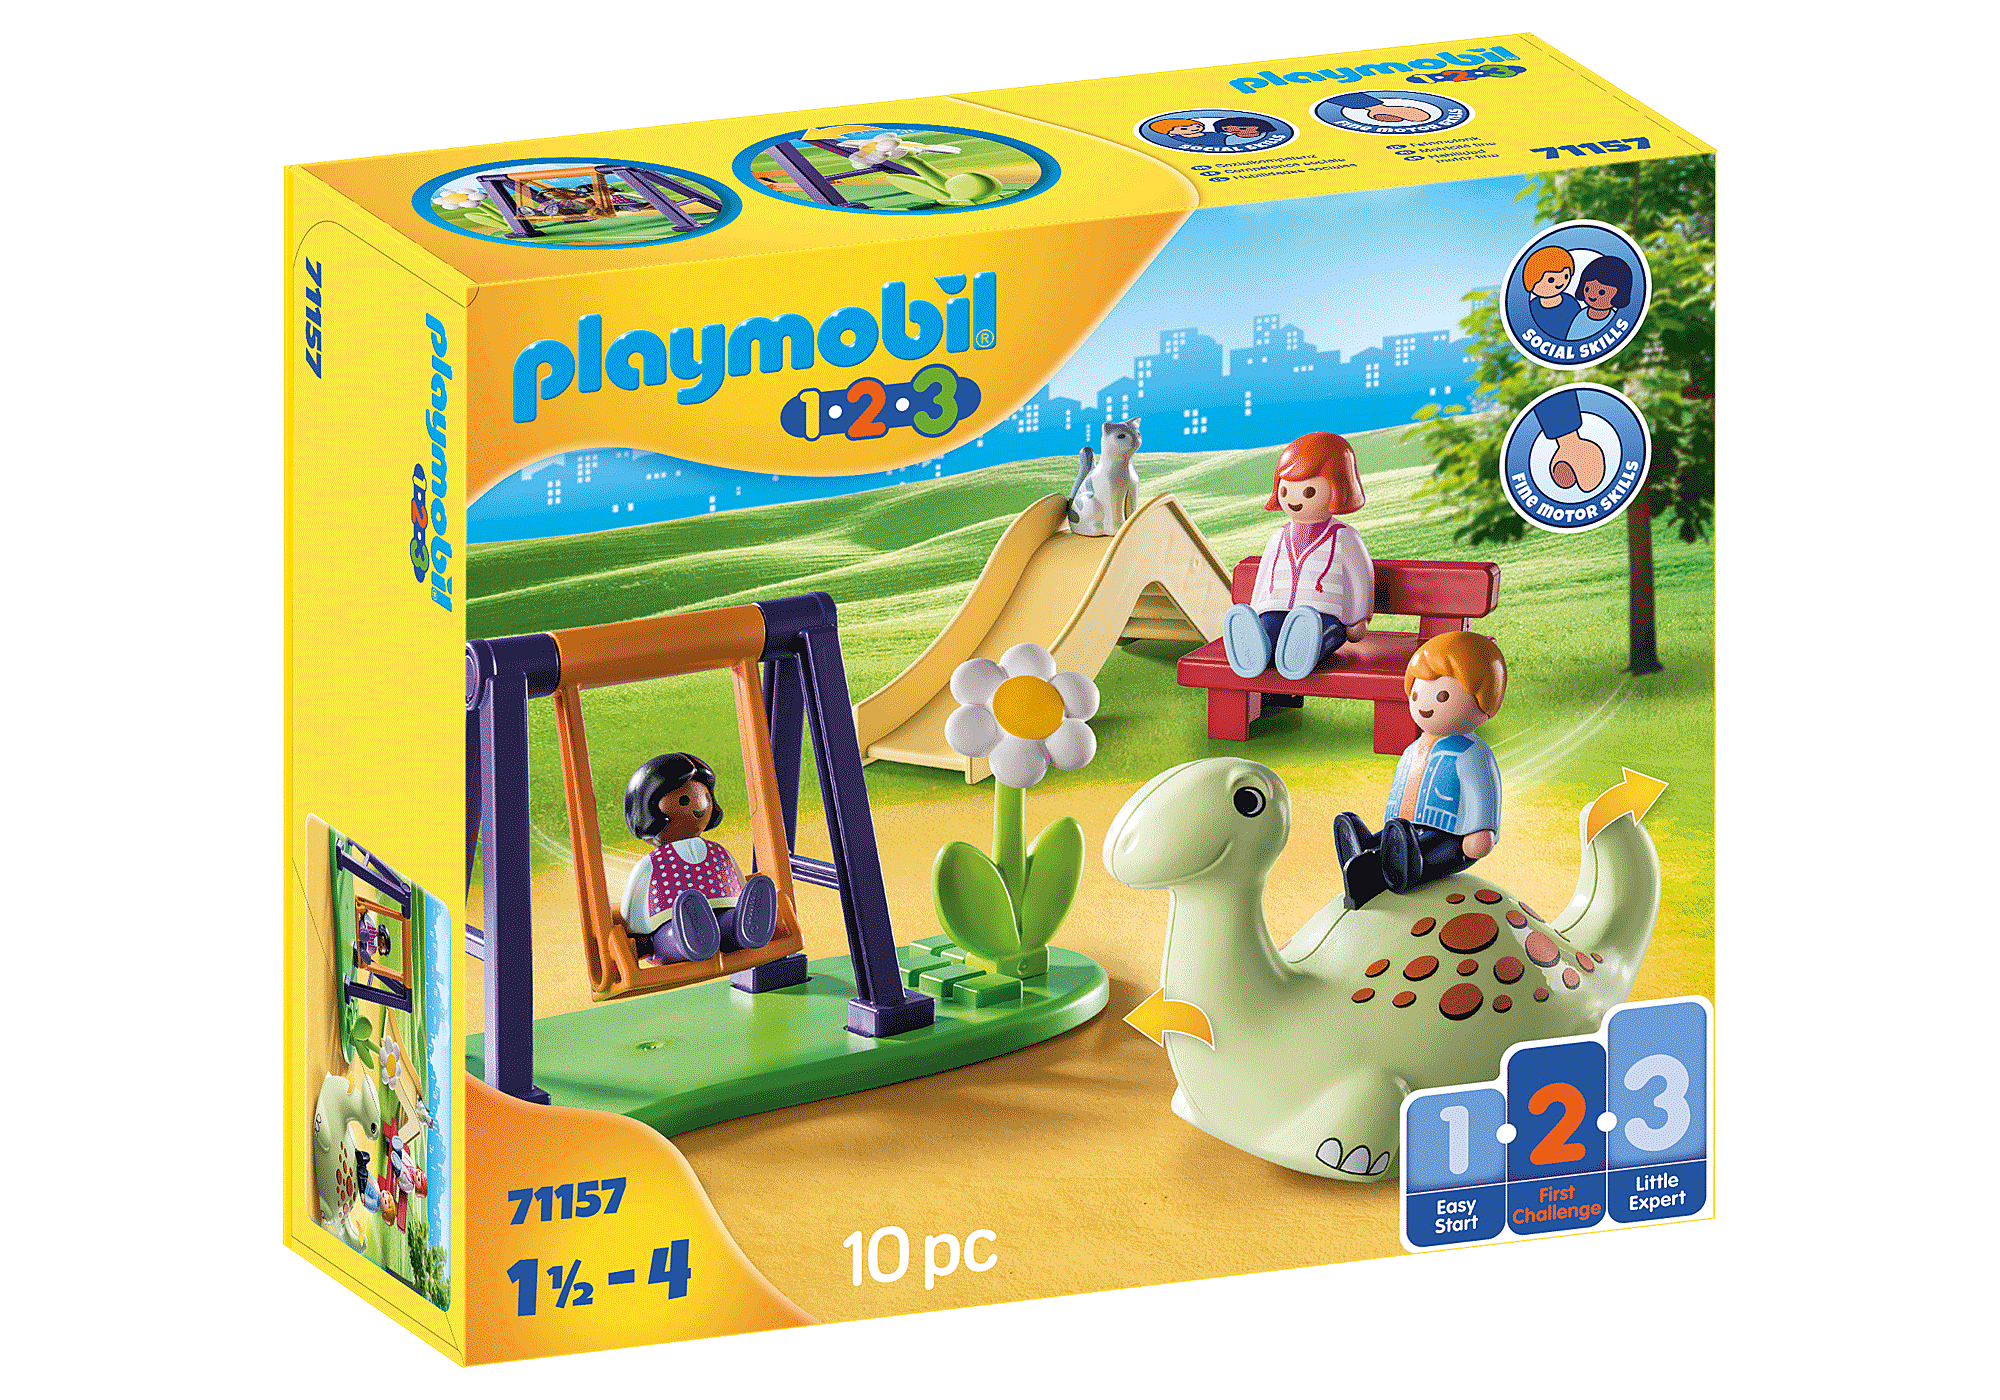 Playmobil 70157 Special Plus Football Player with Goal Wall, Fun  Imaginative Role-Play, PlaySets Suitable for Children Ages 4+